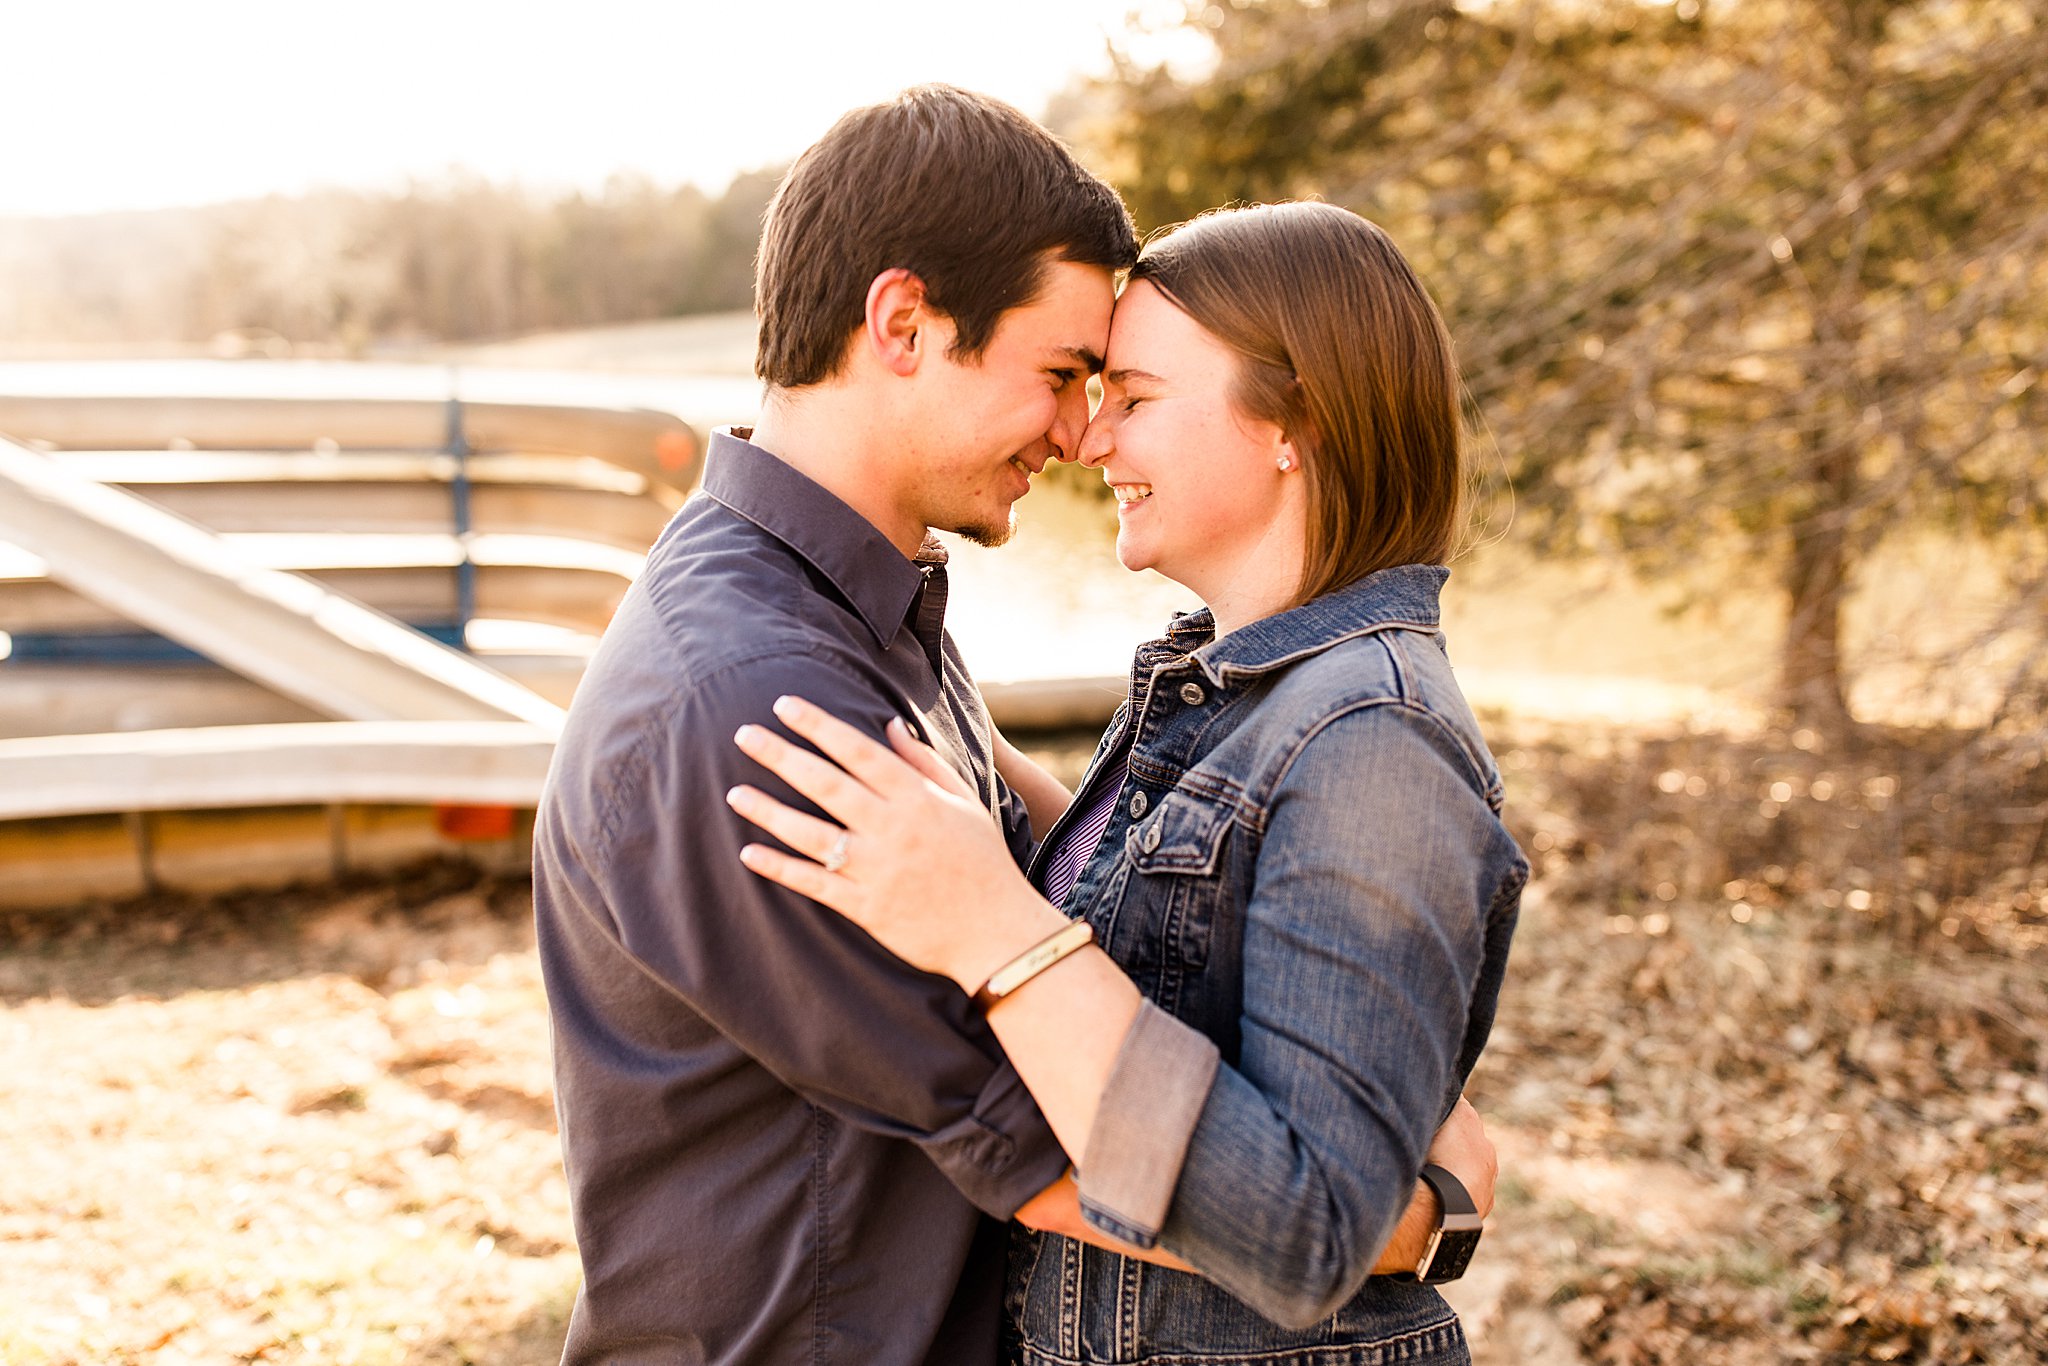 Turkey Hill Bible Camp, Midwest Engagement Session